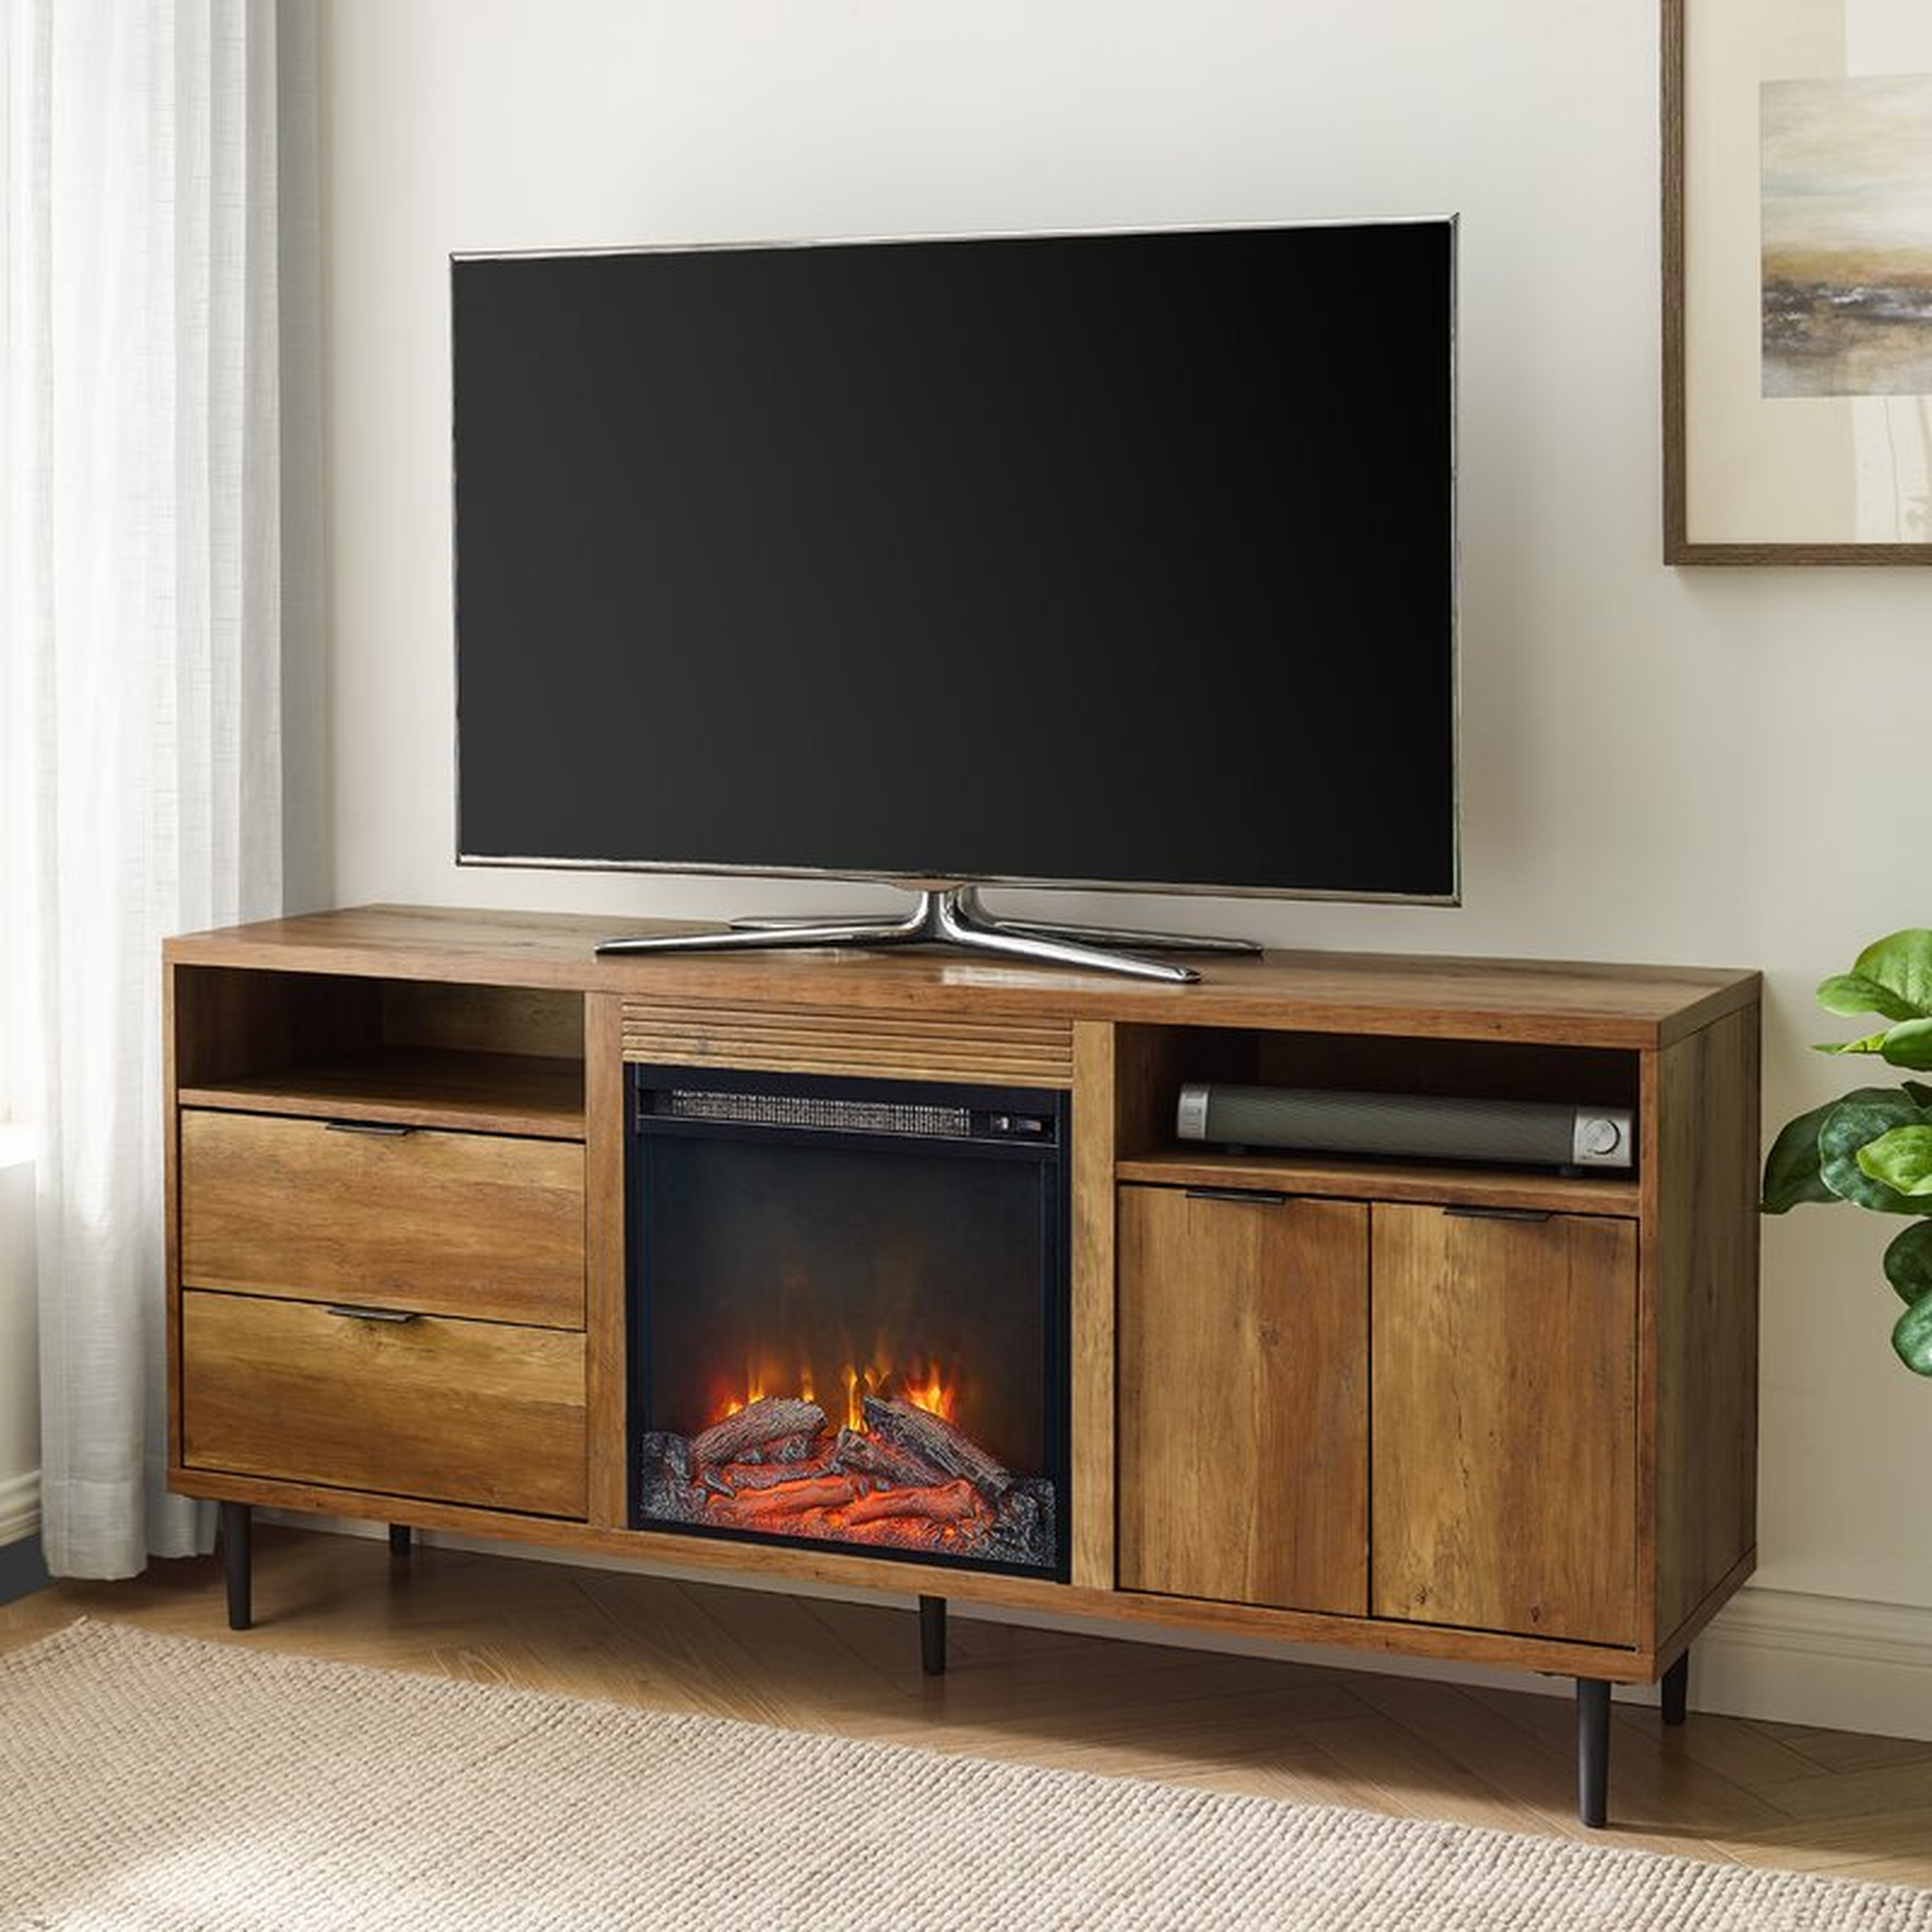 Eglinton TV Stand for TVs up to 65" with Electric Fireplace Included - Wayfair